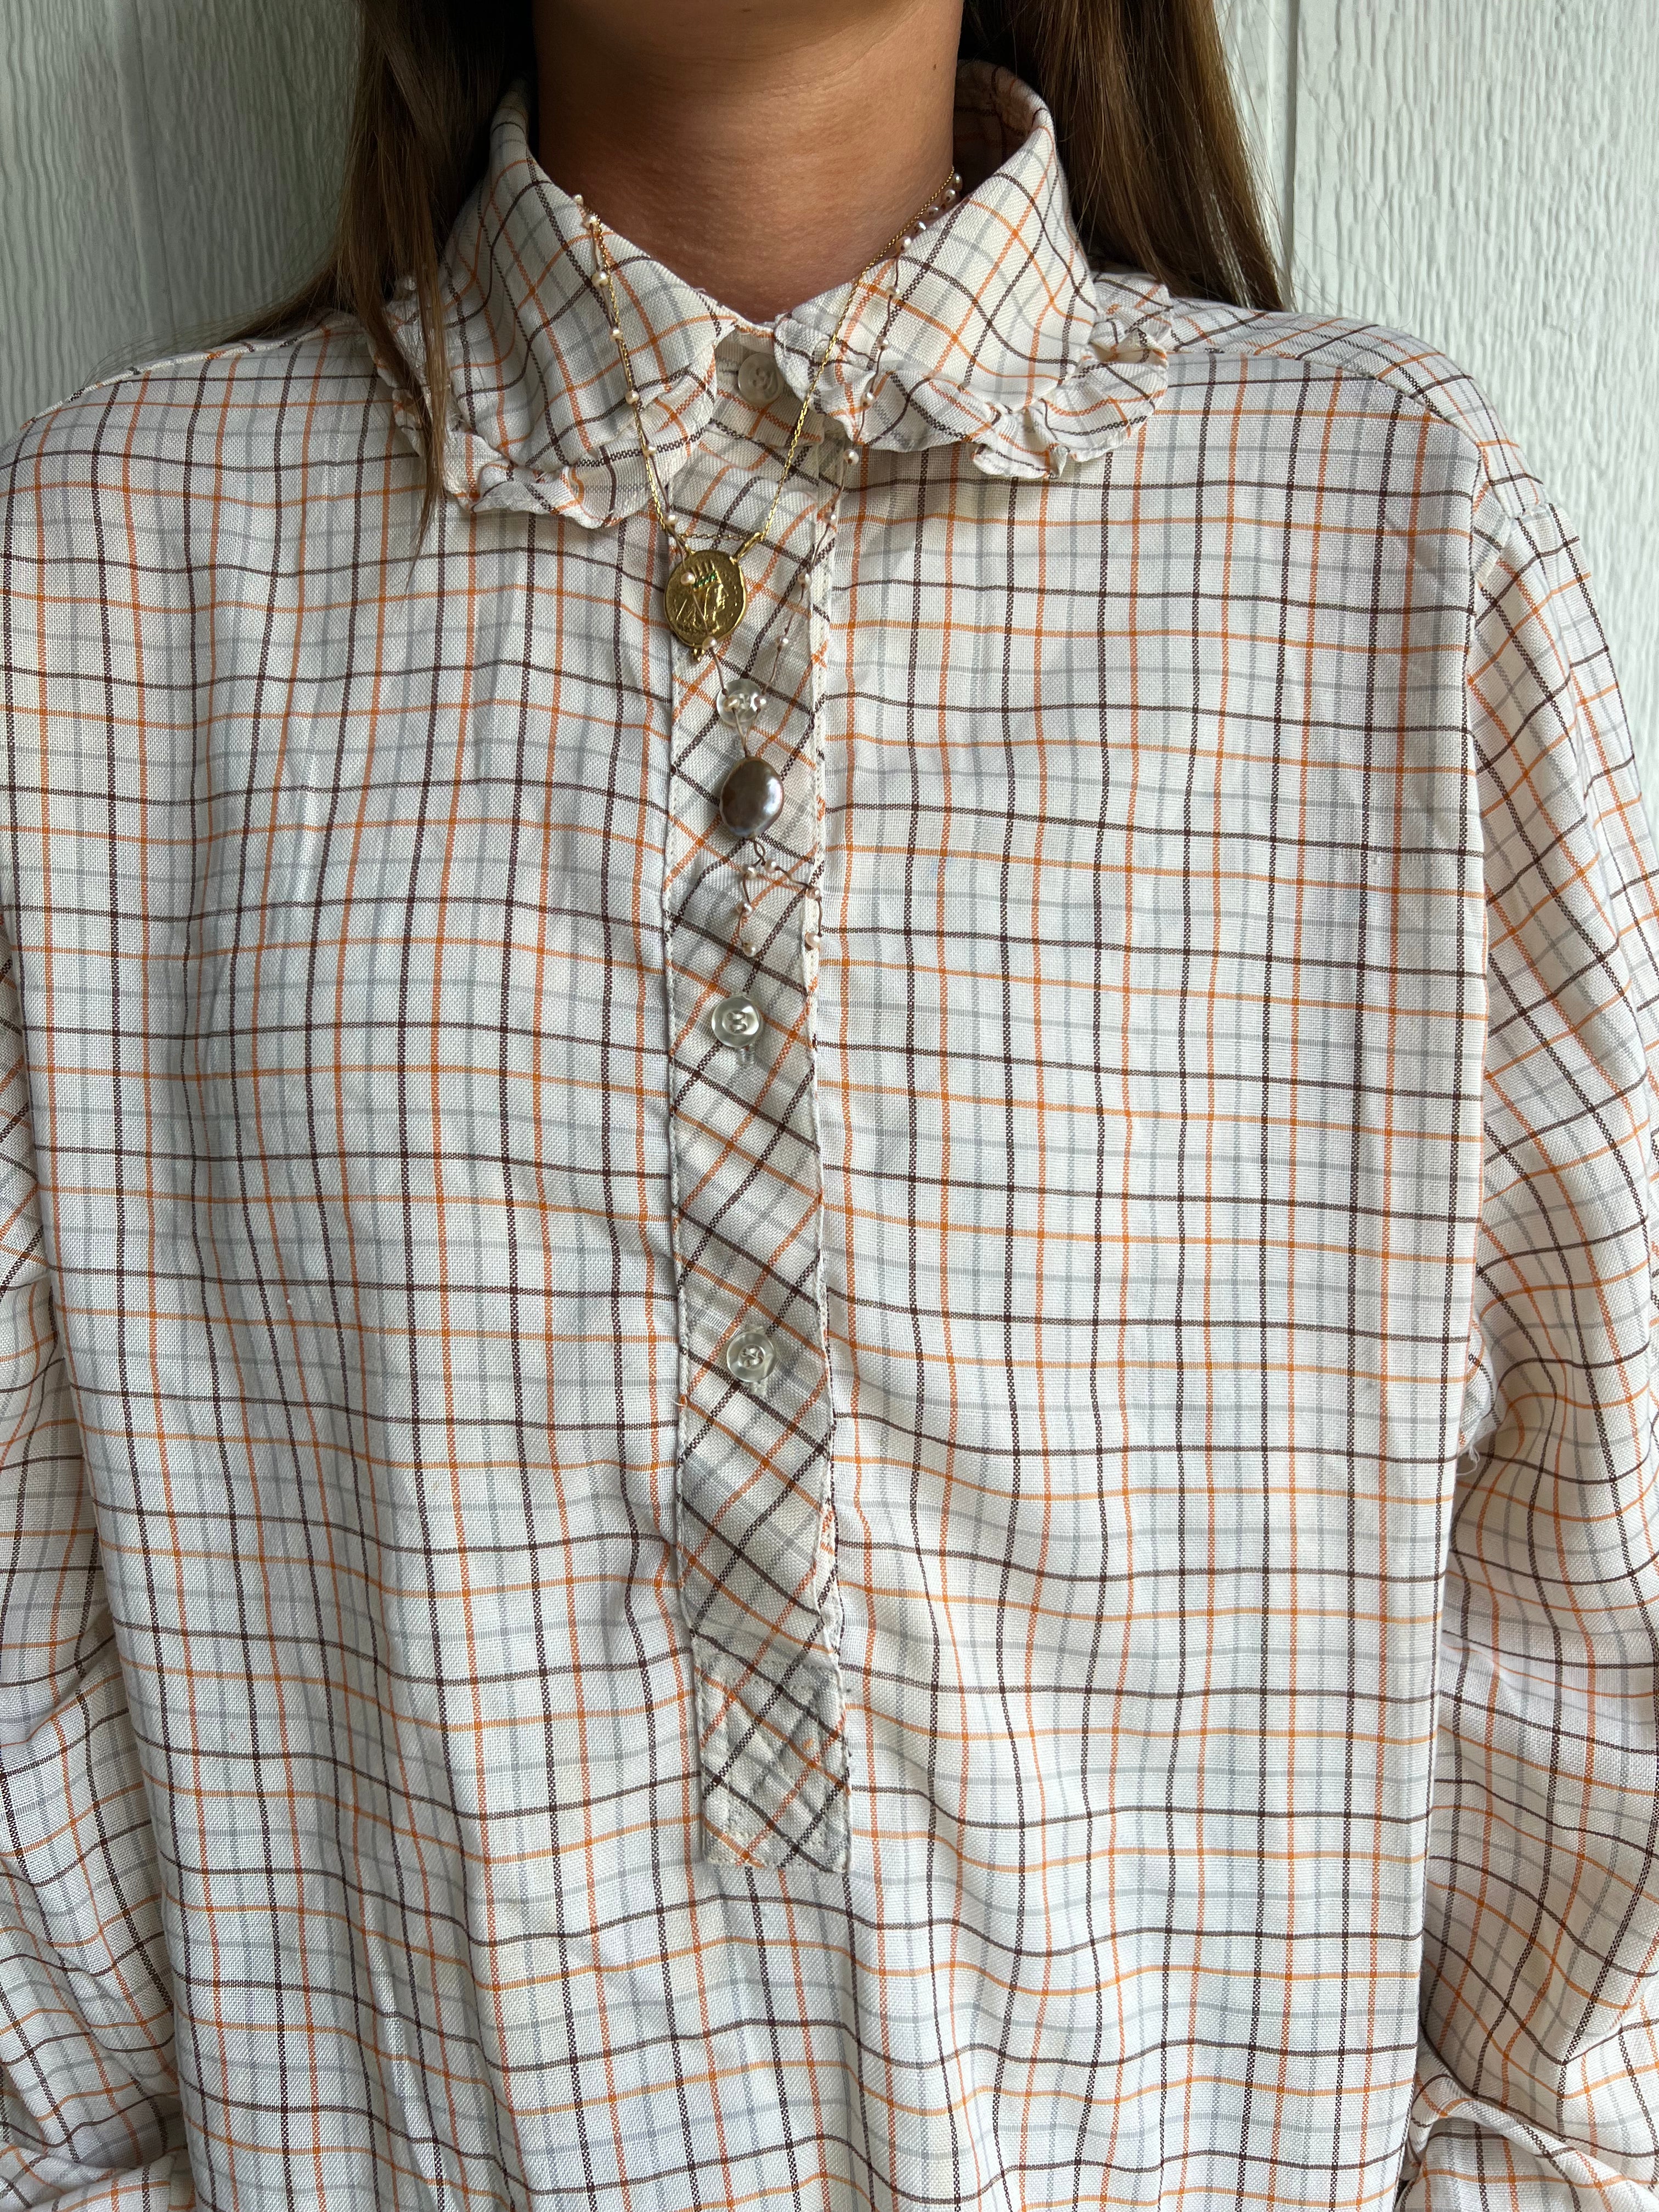 Orange and Brown Checkered Blouse